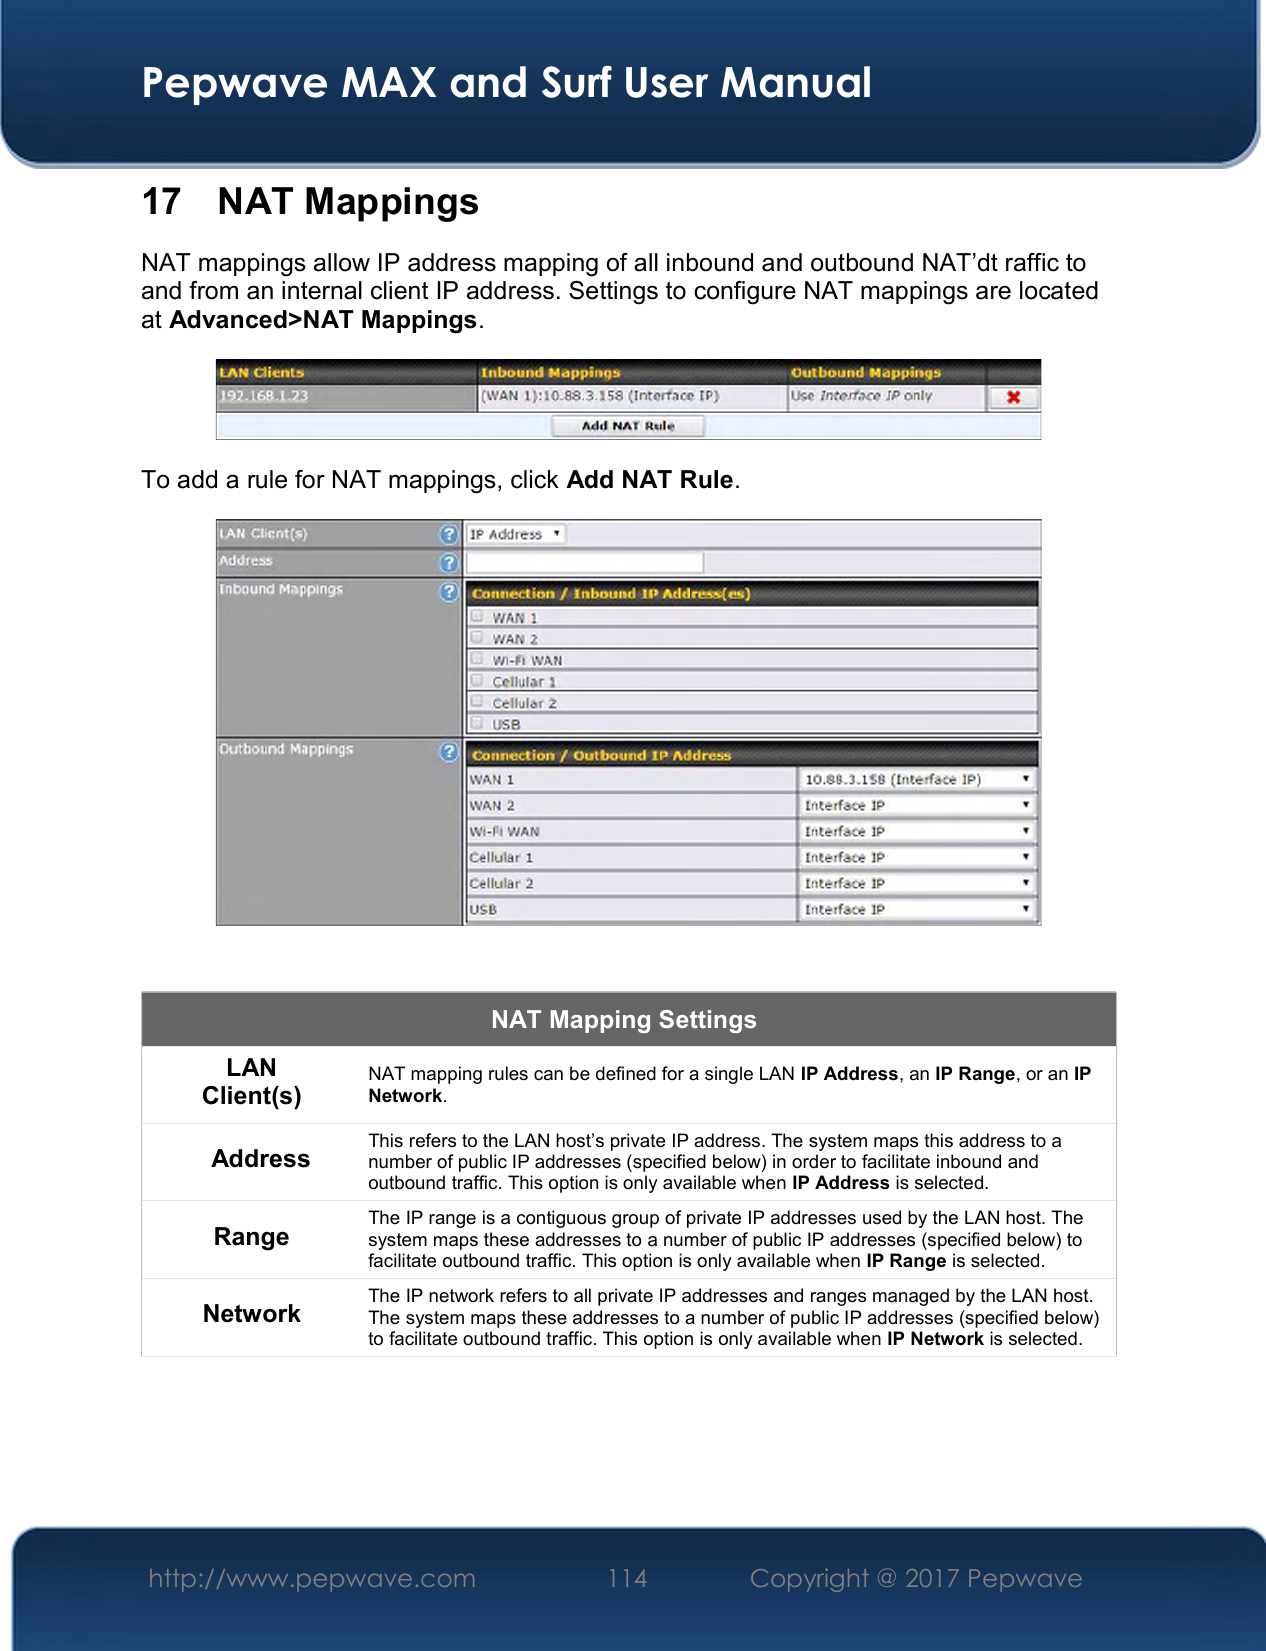  Pepwave MAX and Surf User Manual http://www.pepwave.com  114    Copyright @ 2017 Pepwave   17  NAT Mappings NAT mappings allow IP address mapping of all inbound and outbound NAT’dt raffic to and from an internal client IP address. Settings to configure NAT mappings are located at Advanced&gt;NAT Mappings.  To add a rule for NAT mappings, click Add NAT Rule.   NAT Mapping Settings LAN Client(s) NAT mapping rules can be defined for a single LAN IP Address, an IP Range, or an IP Network. Address This refers to the LAN host’s private IP address. The system maps this address to a number of public IP addresses (specified below) in order to facilitate inbound and outbound traffic. This option is only available when IP Address is selected. Range The IP range is a contiguous group of private IP addresses used by the LAN host. The system maps these addresses to a number of public IP addresses (specified below) to facilitate outbound traffic. This option is only available when IP Range is selected. Network The IP network refers to all private IP addresses and ranges managed by the LAN host. The system maps these addresses to a number of public IP addresses (specified below) to facilitate outbound traffic. This option is only available when IP Network is selected. 